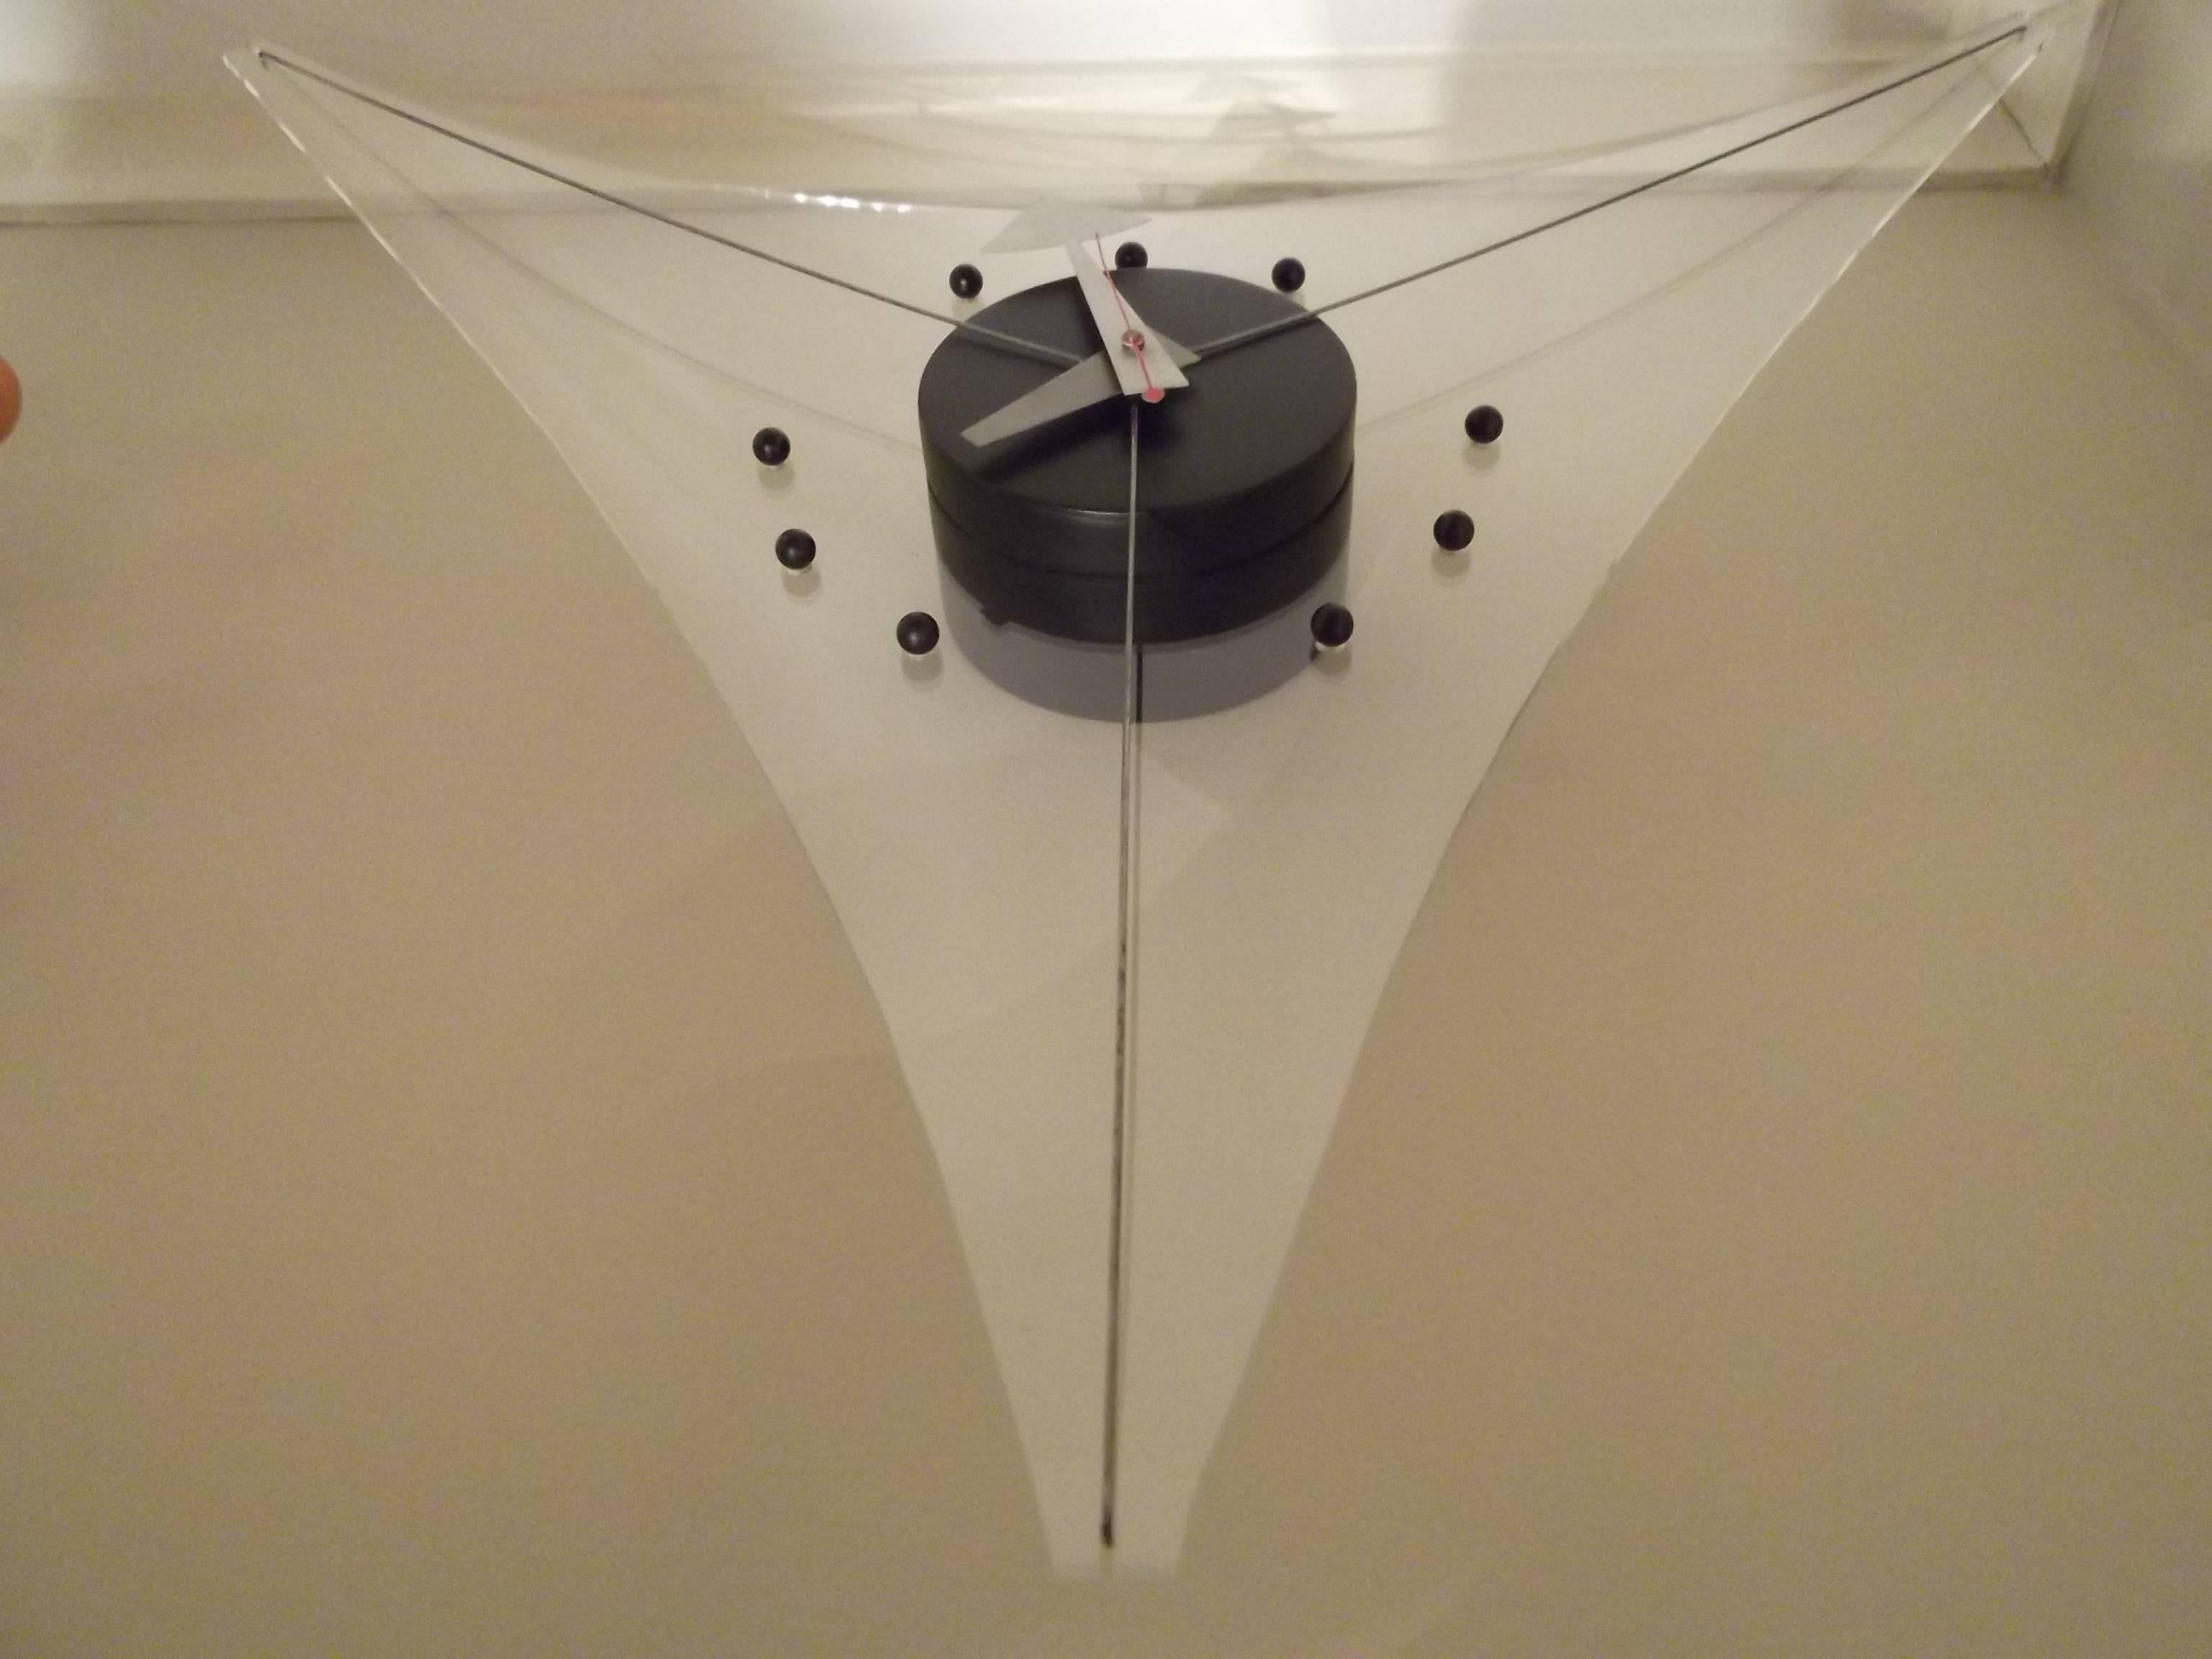 In all of my years of hunting and collecting Nelson clocks, I have never seen another one of these! It is the Lucite version of the hard to find Triangle clock, that resembles a kite, too. It is in super clean condition. I have personally owned it